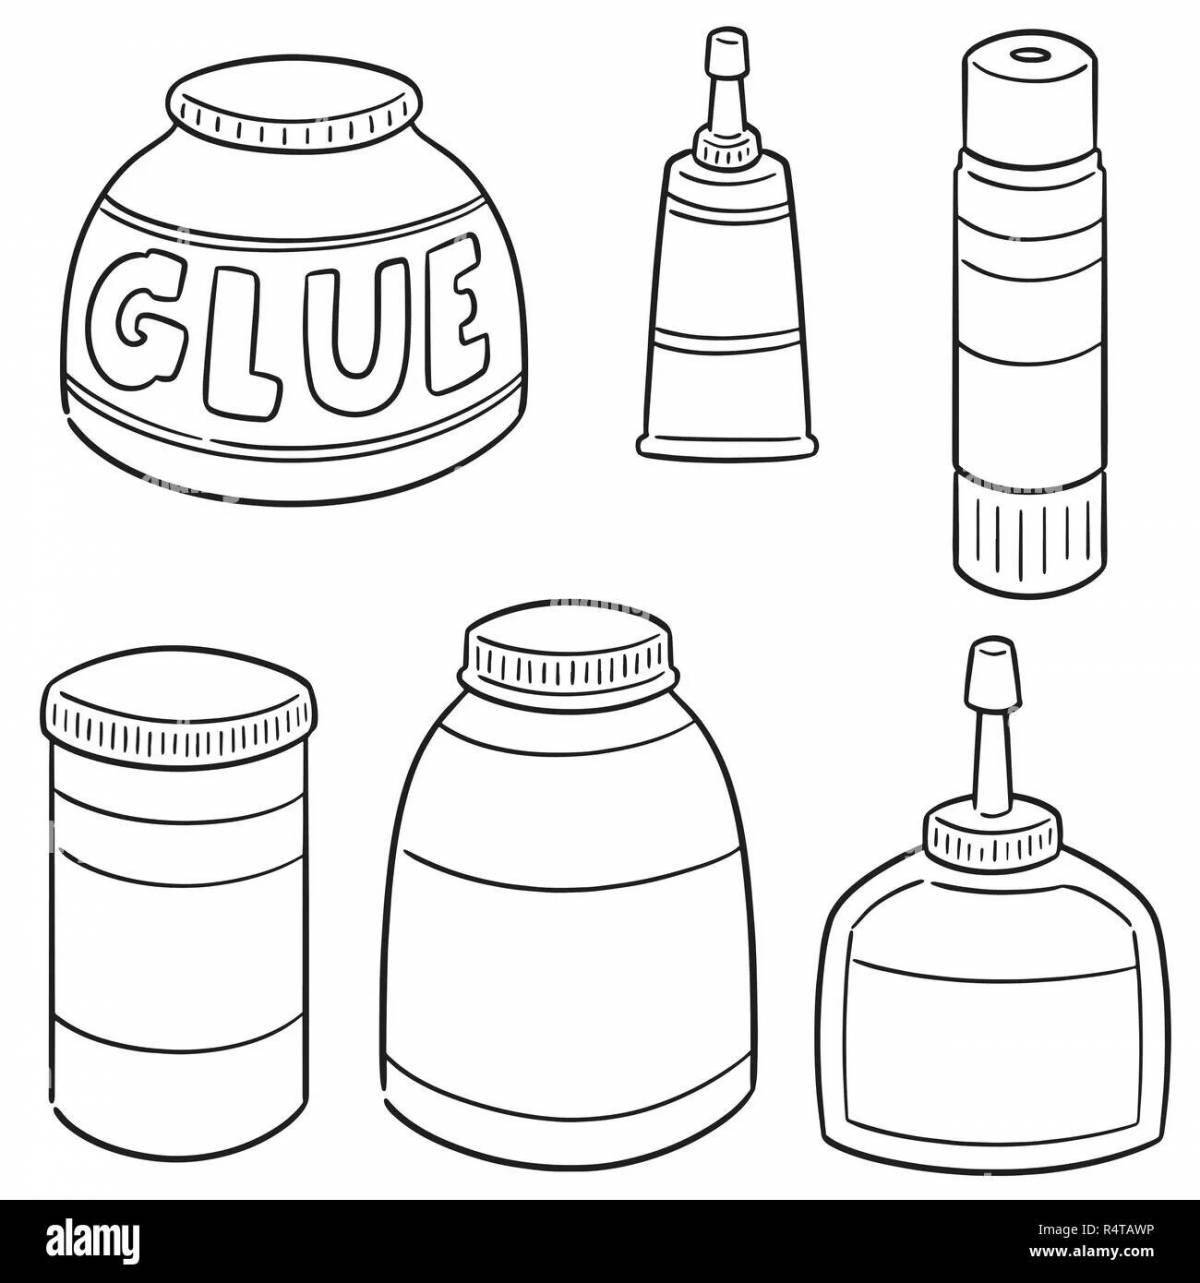 Glossy glue stick for coloring